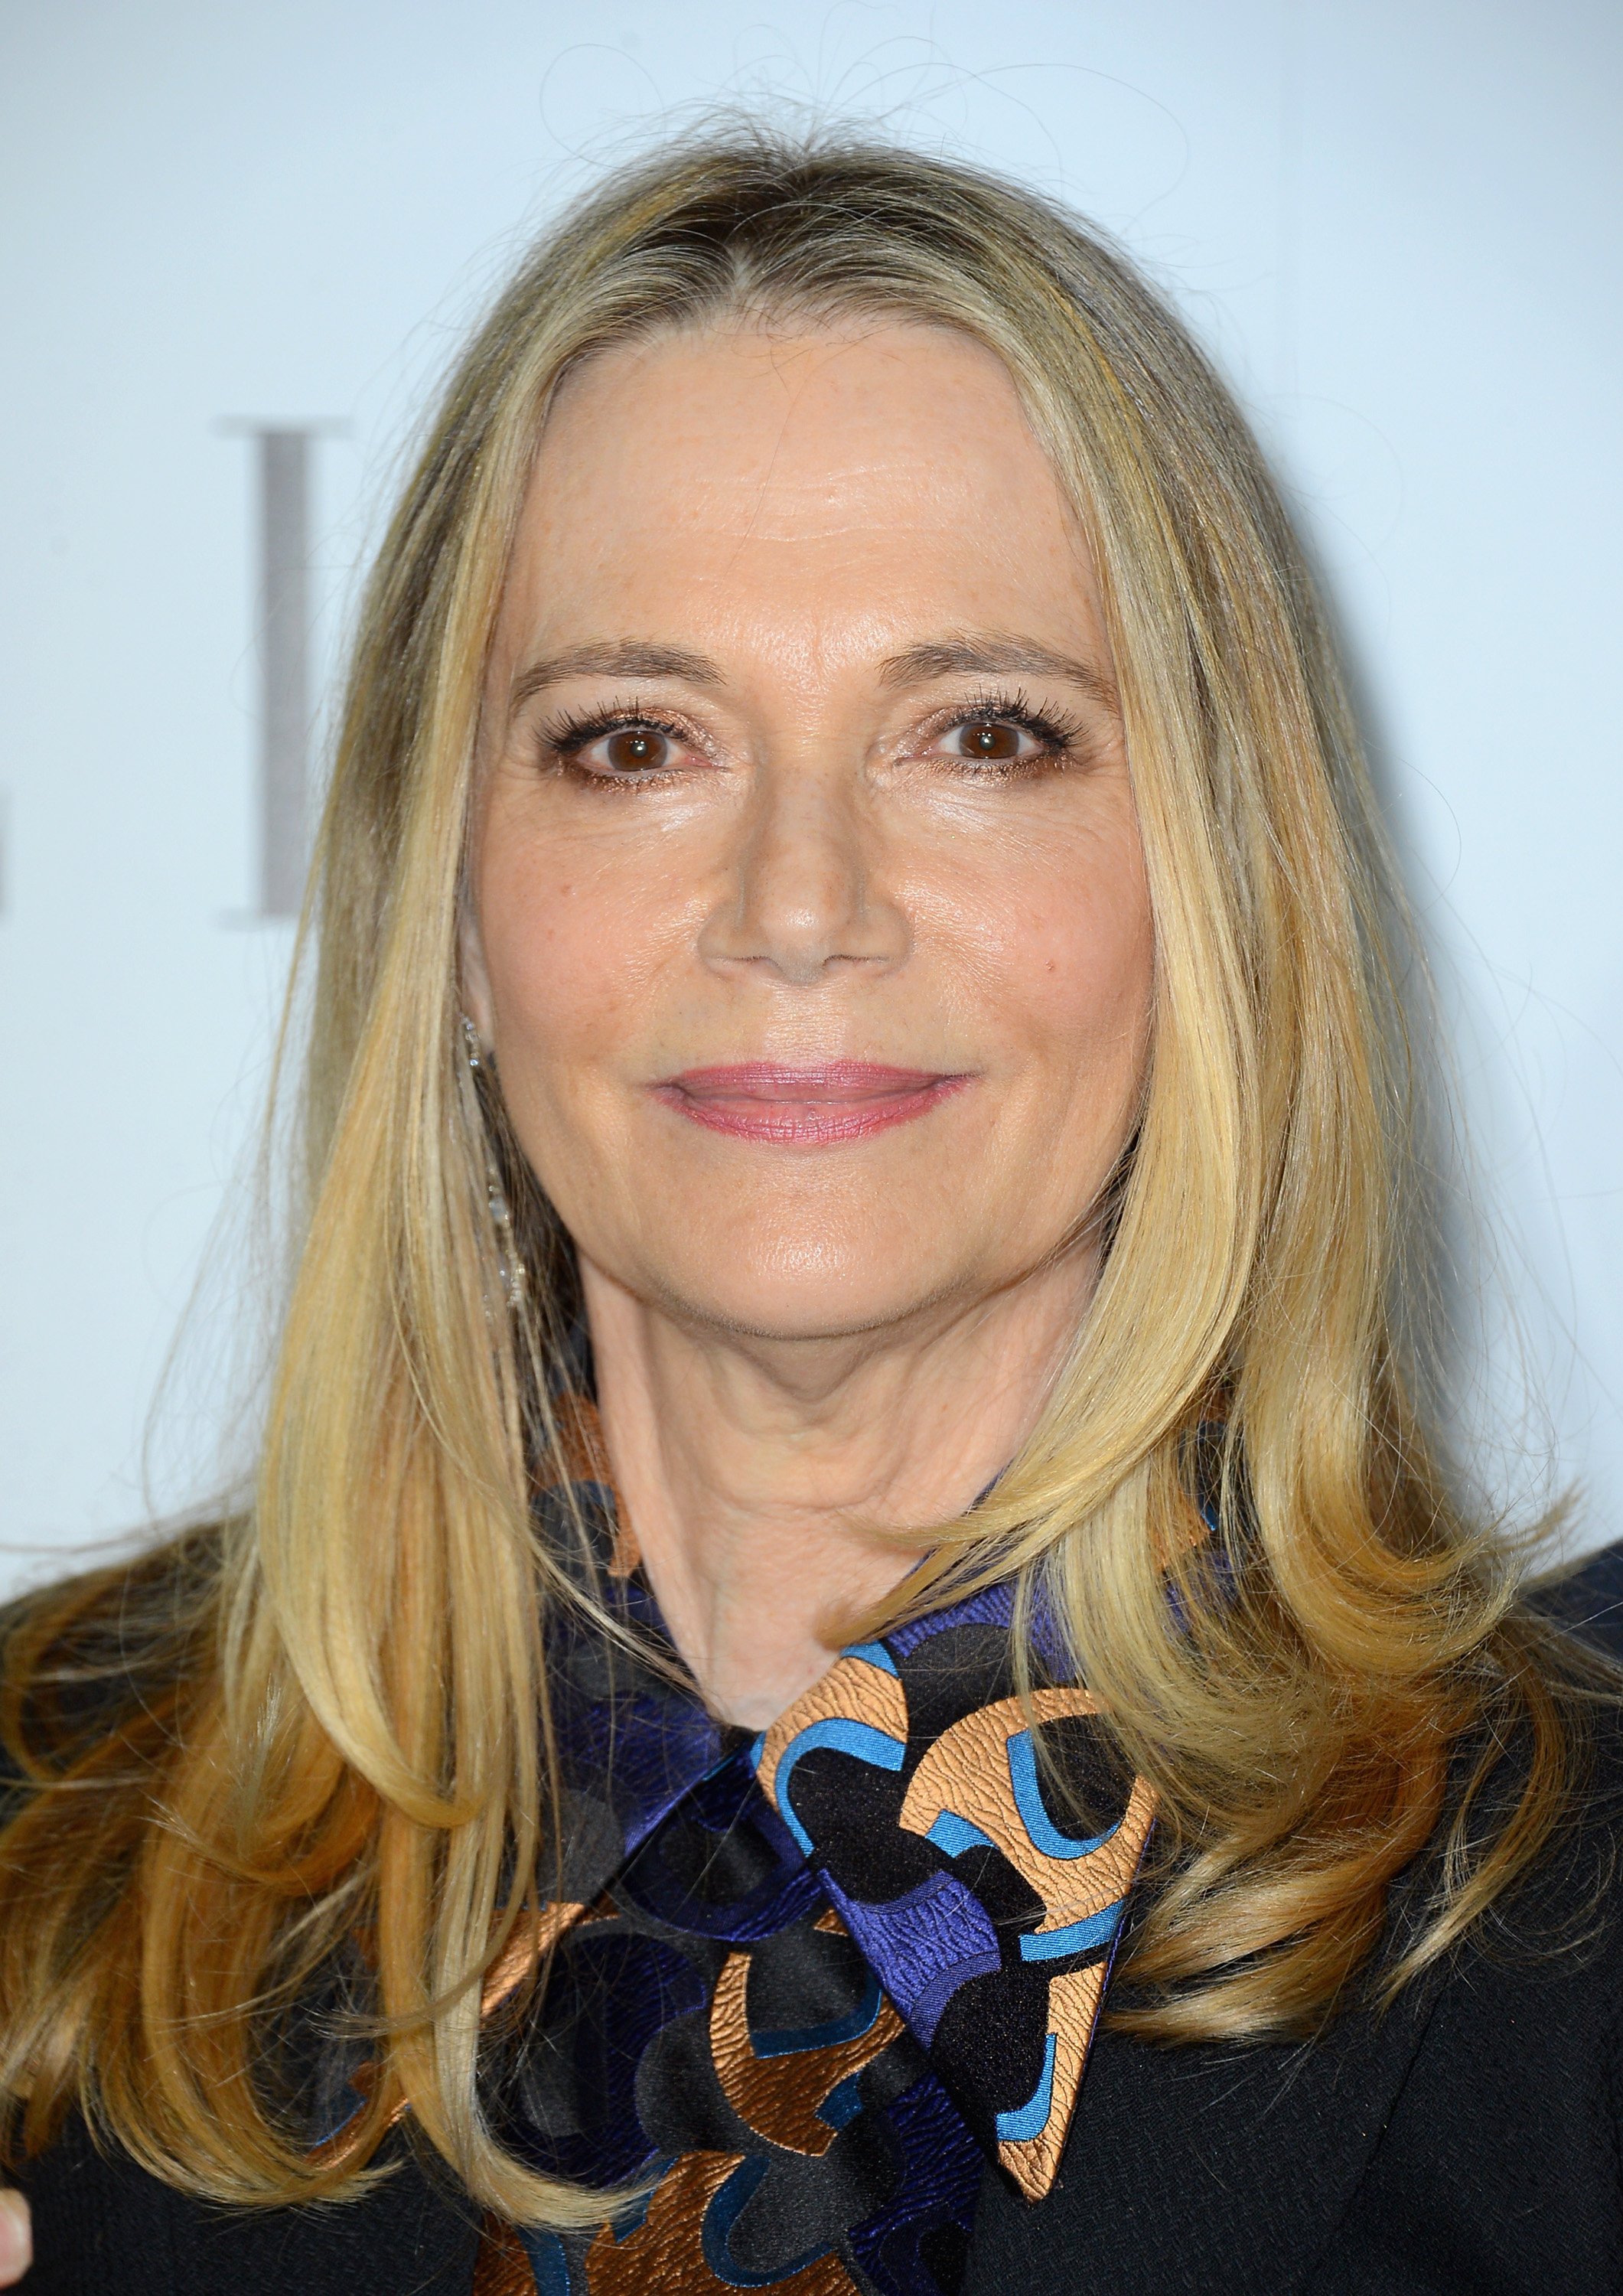 Peggy Lipton at ELLE's 19th Annual Women In Hollywood Celebration at the Four Seasons Hotel  Beverly Hills, California | Photo: Getty Images